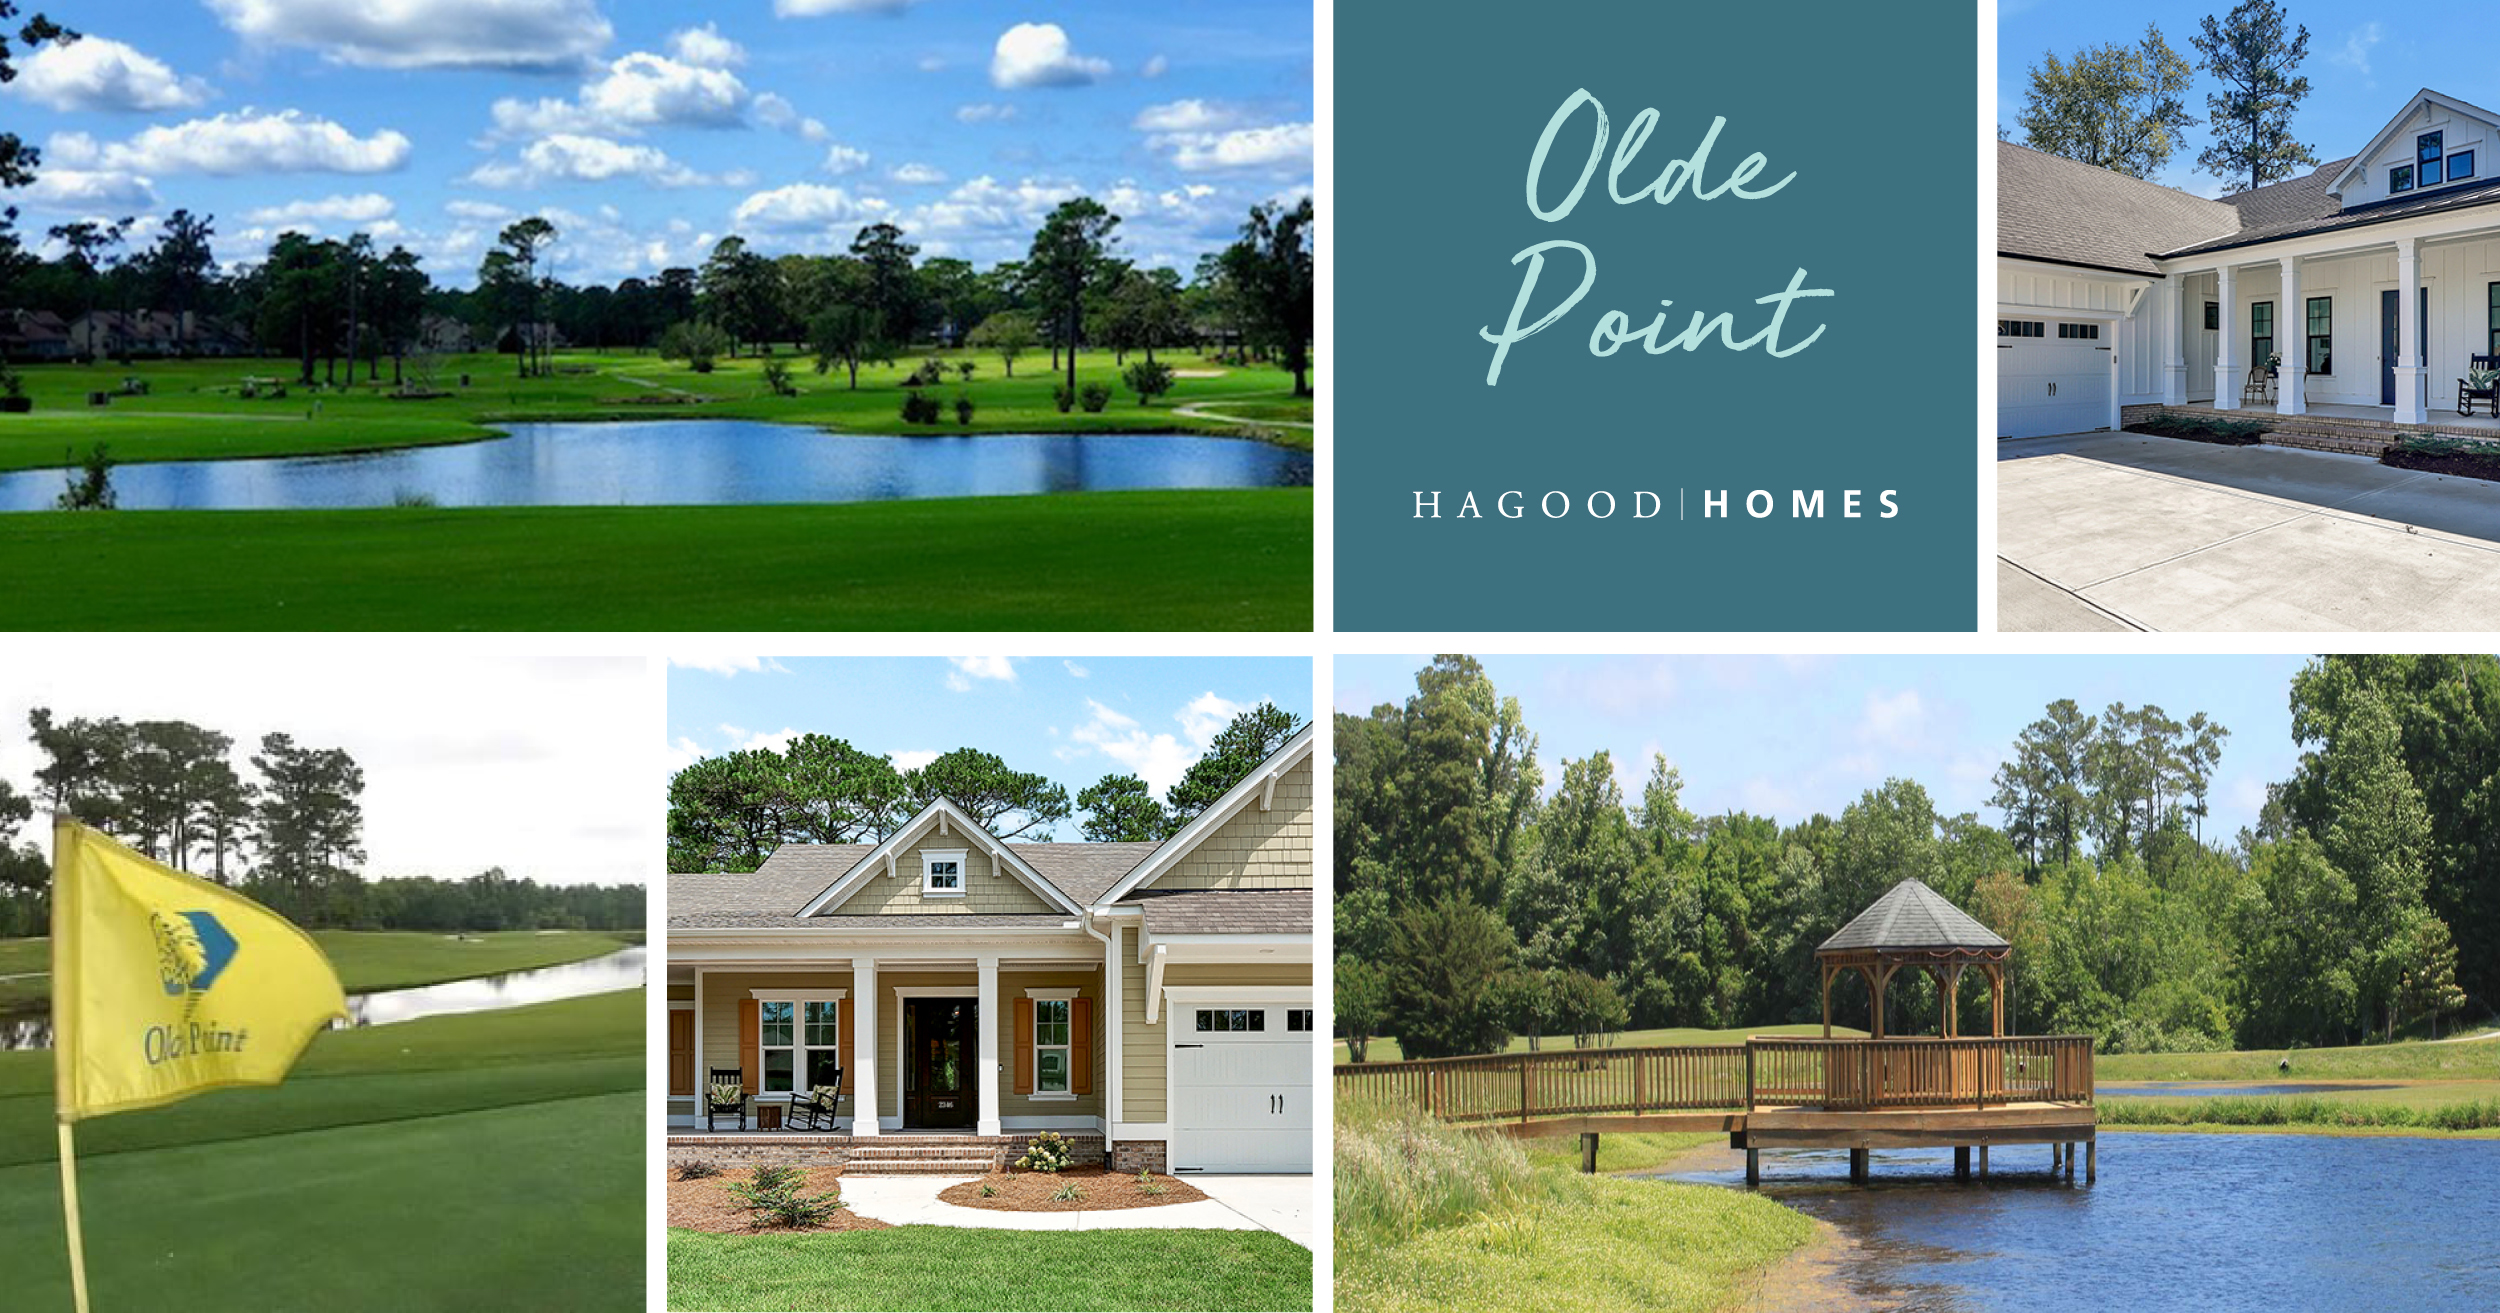 Welcome to Olde Point! Hampstead’s Waterfront Golf Course Community